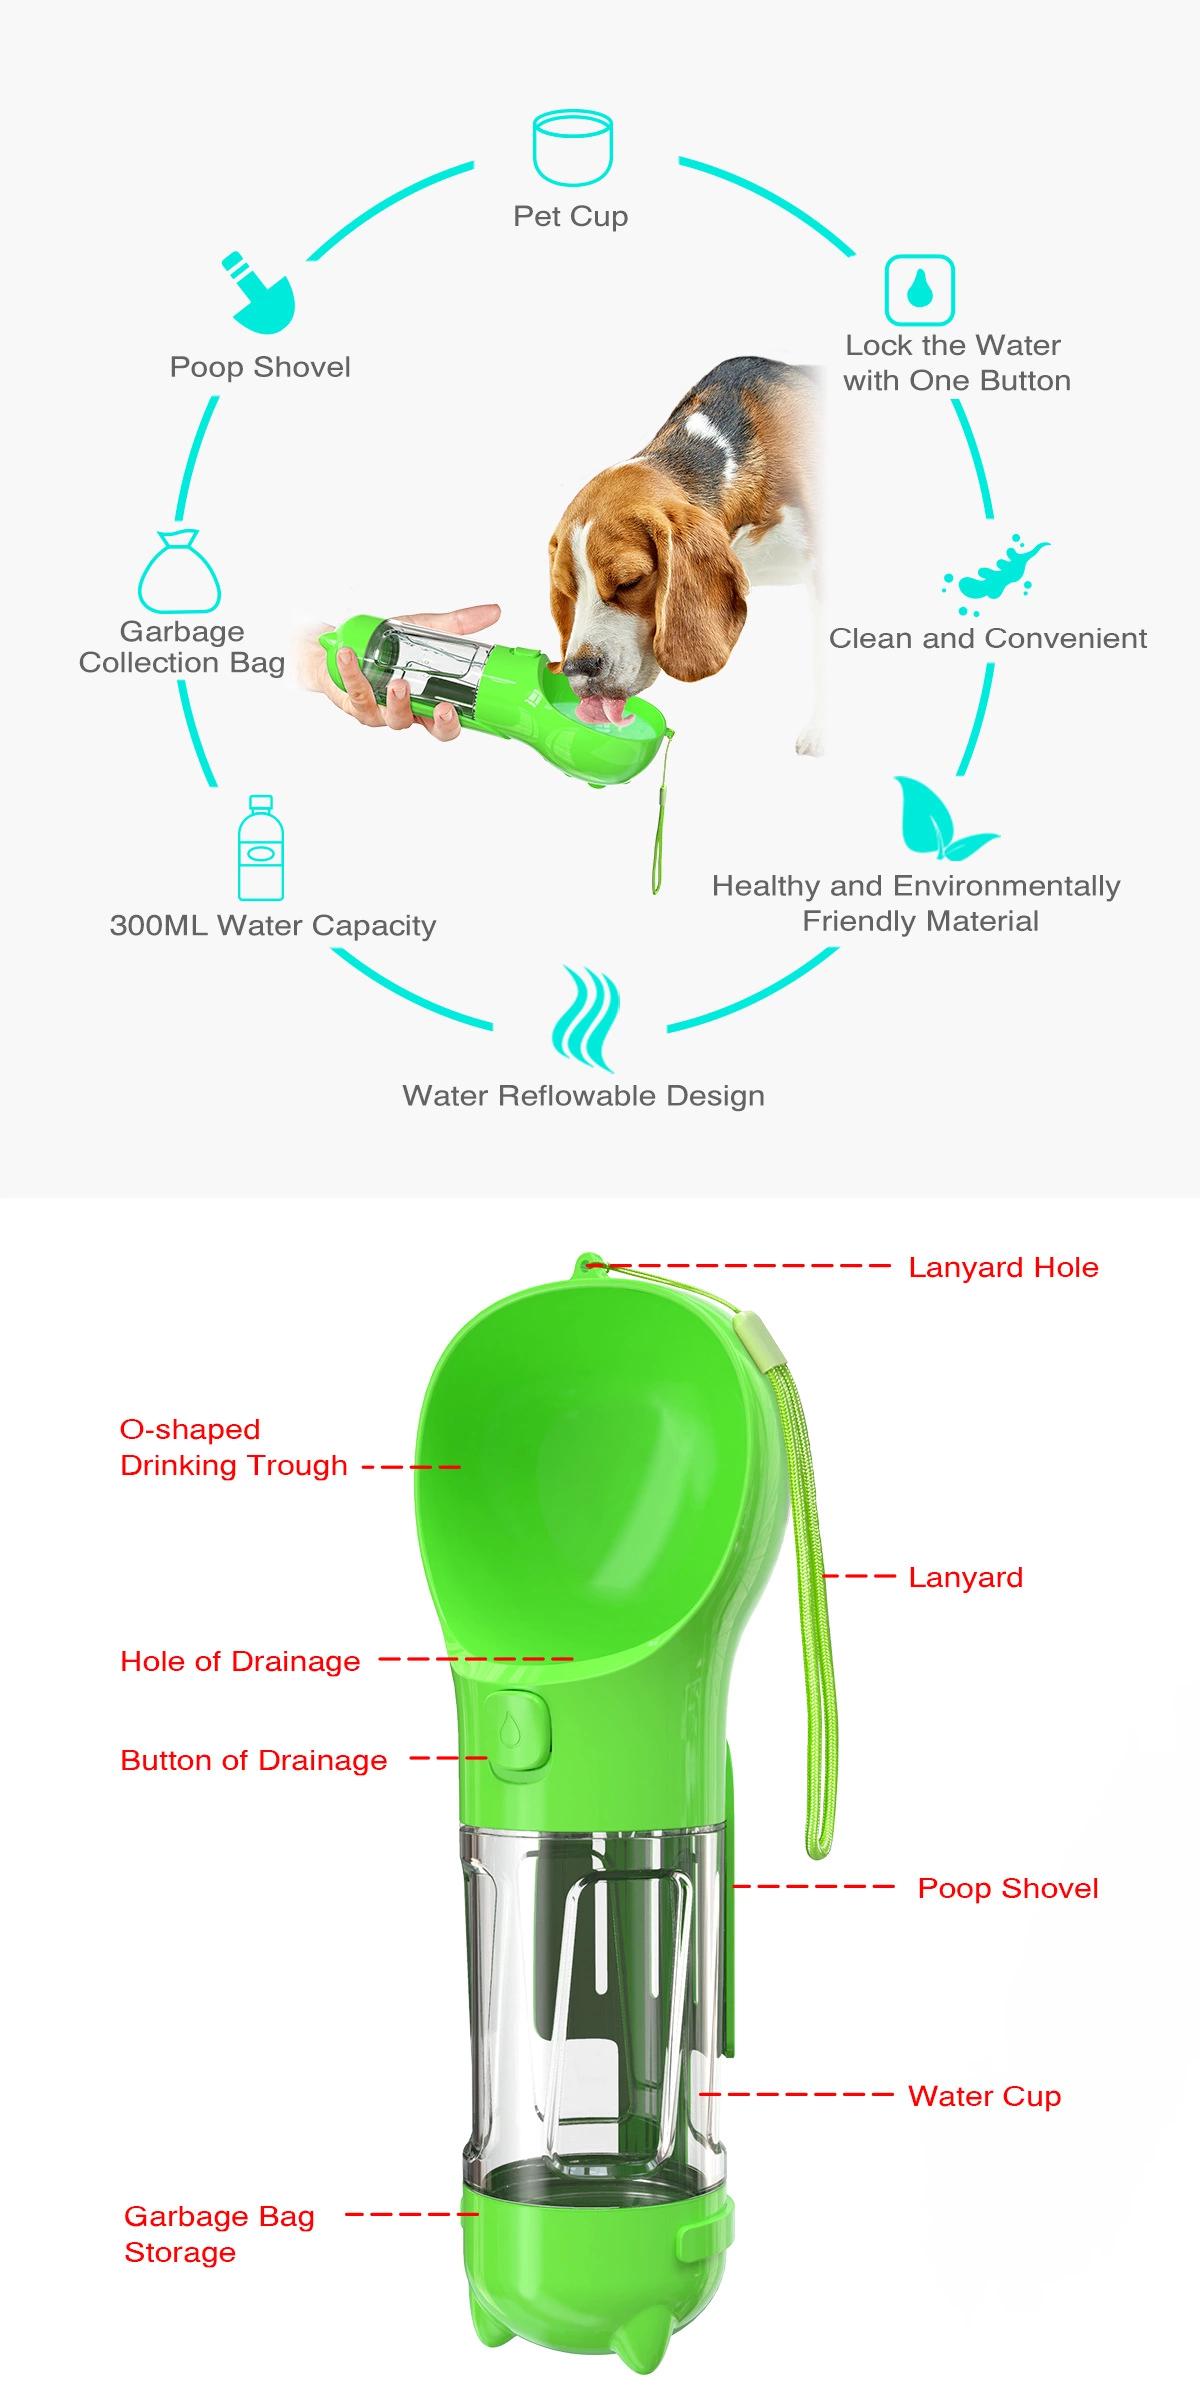 2020 new design 3-in-1 pet travel water bottle, outdoor dog drinking and food bottle with poop bag separator, multifunctional outdoor pet bottle, hot outdoor pet travel water bottle, newly designed 2020 new dog outdoor water and food cup, pet feces, water and food three-in-one bottle